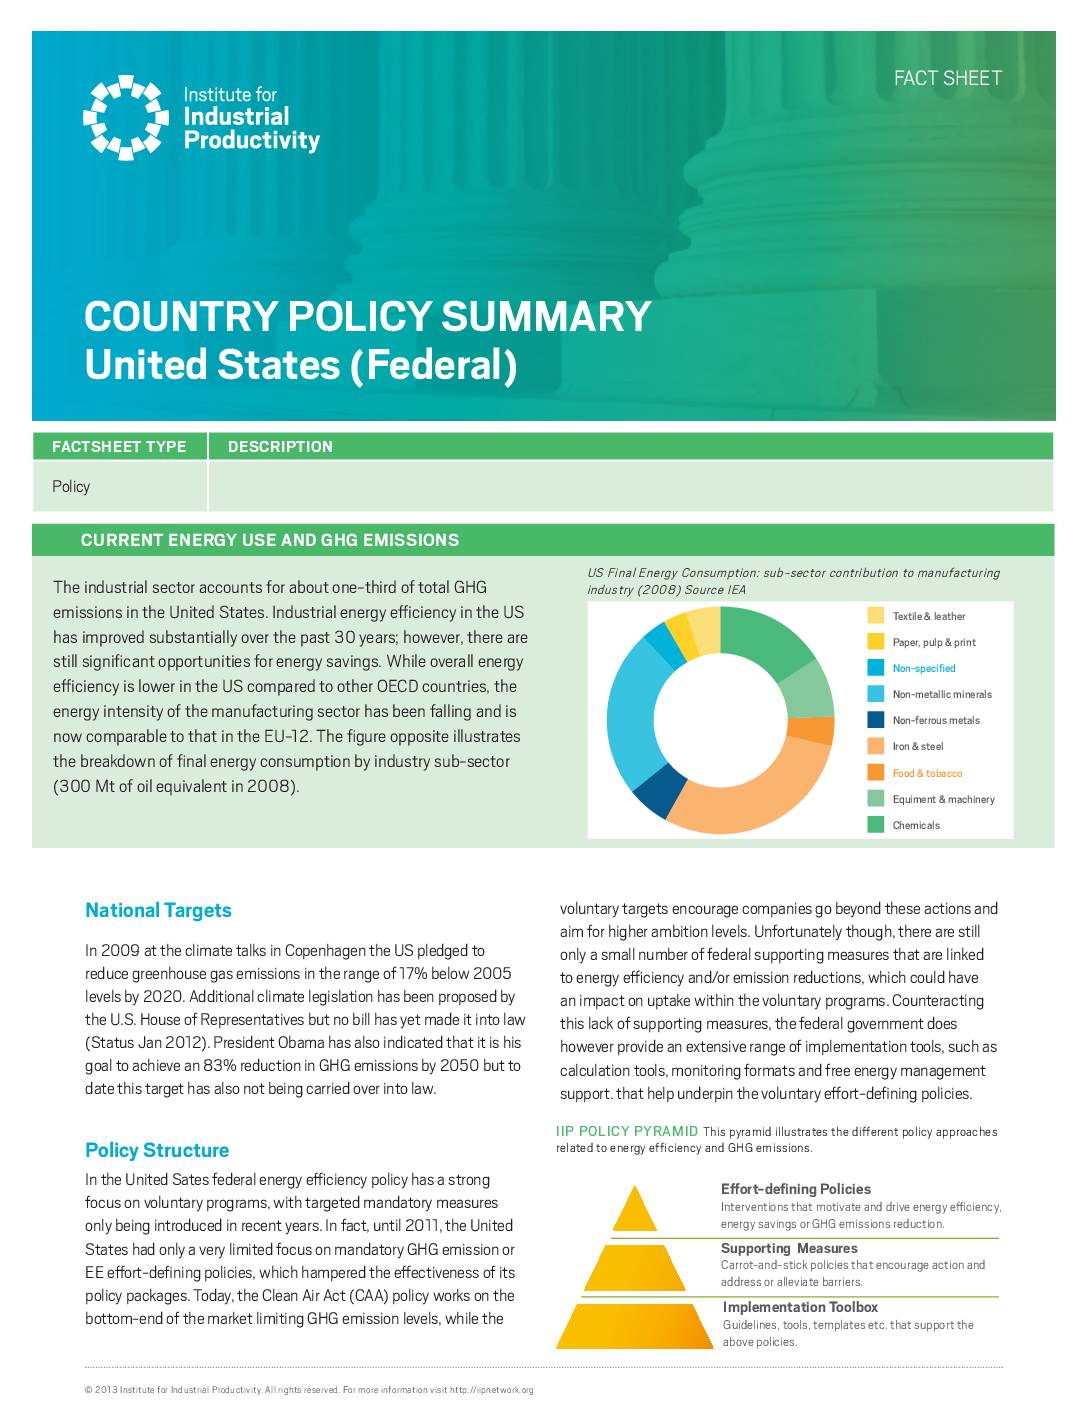 Country Policy Summary: United States (Federal)